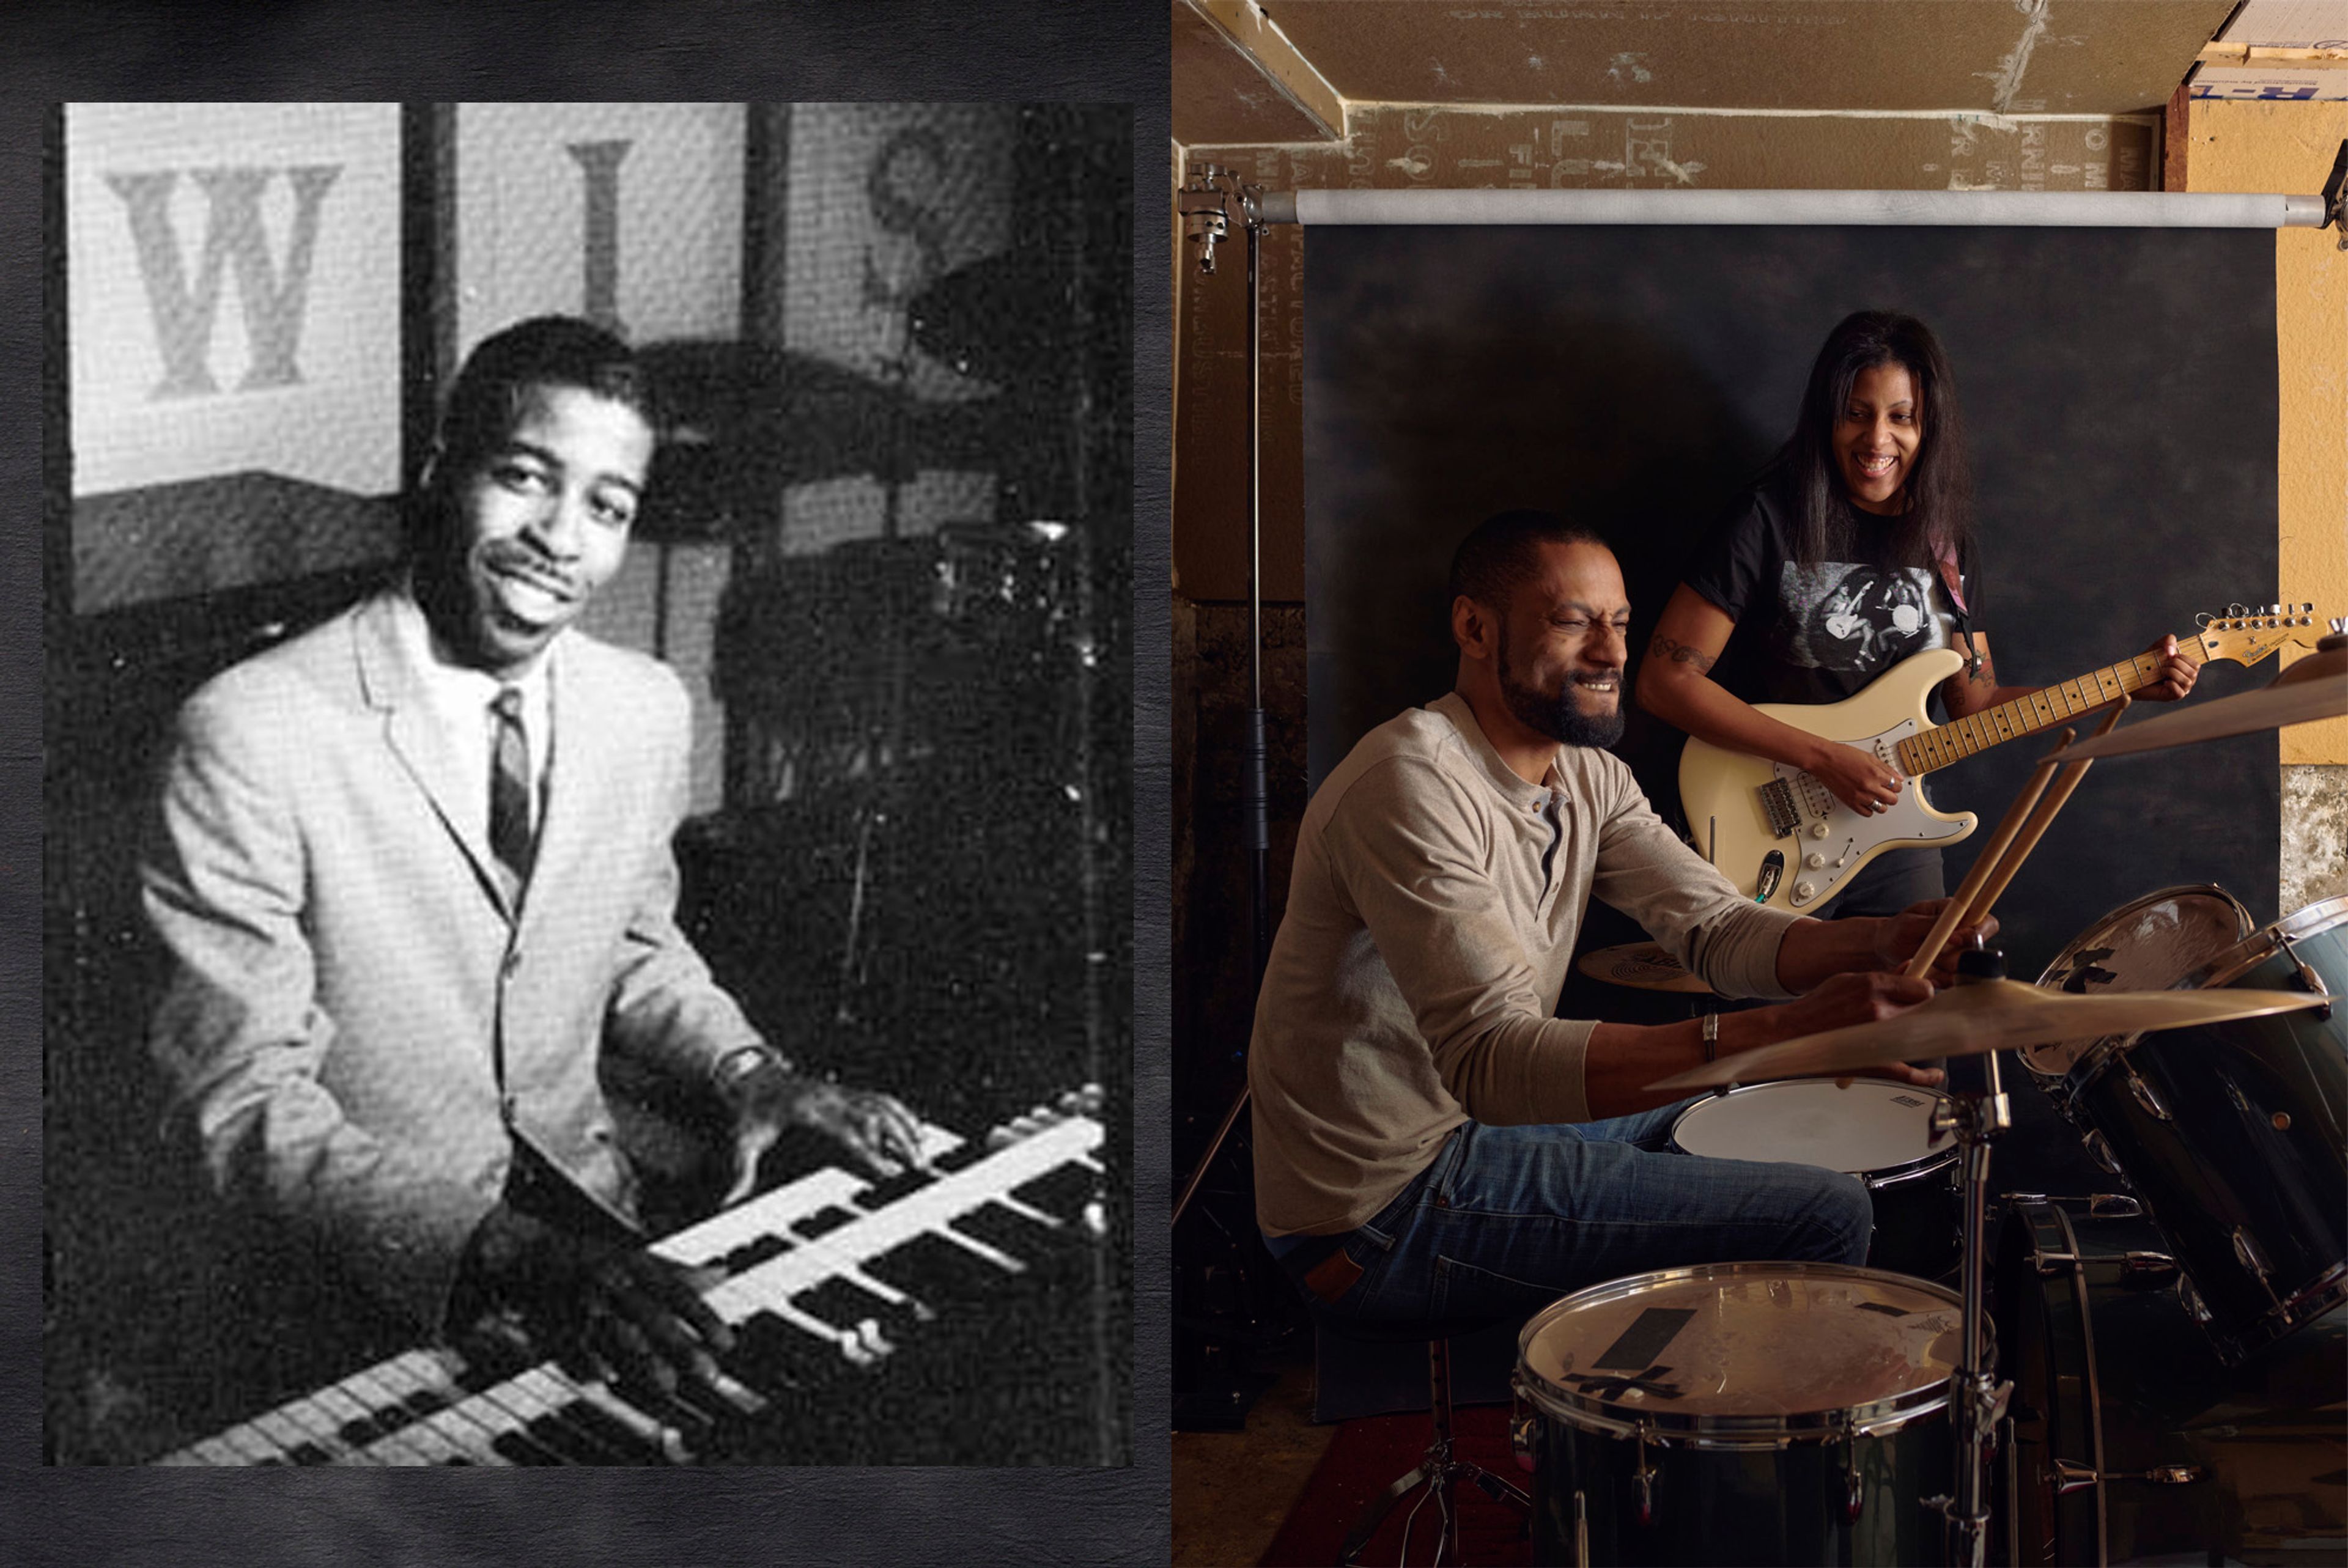 left: a black and white image of a man playing piano. right: a man plays the drums and a woman, standing, plays guitar